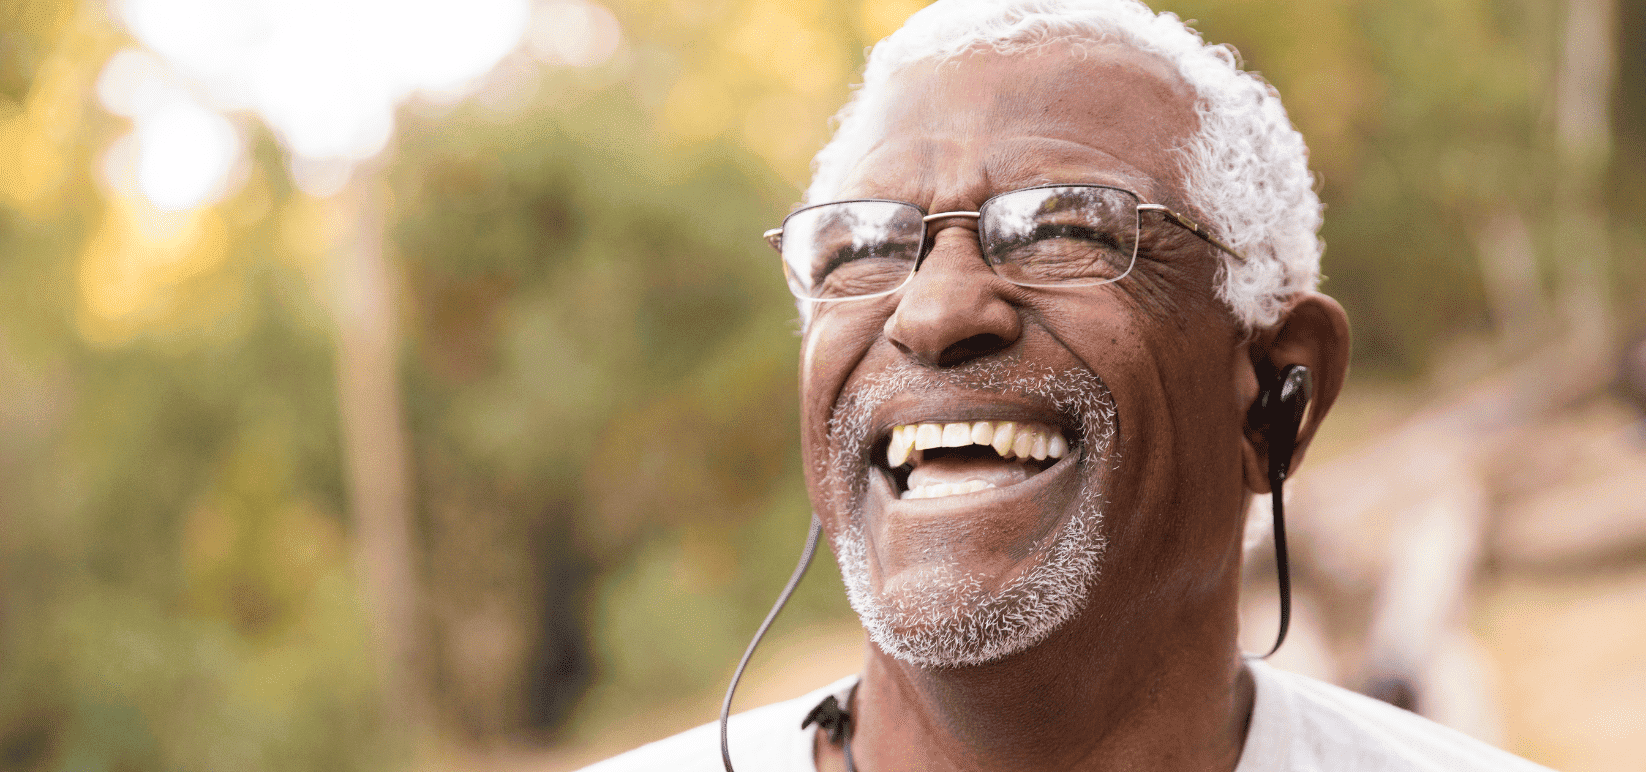 senior man with bluetooth headphone and glasses smiling